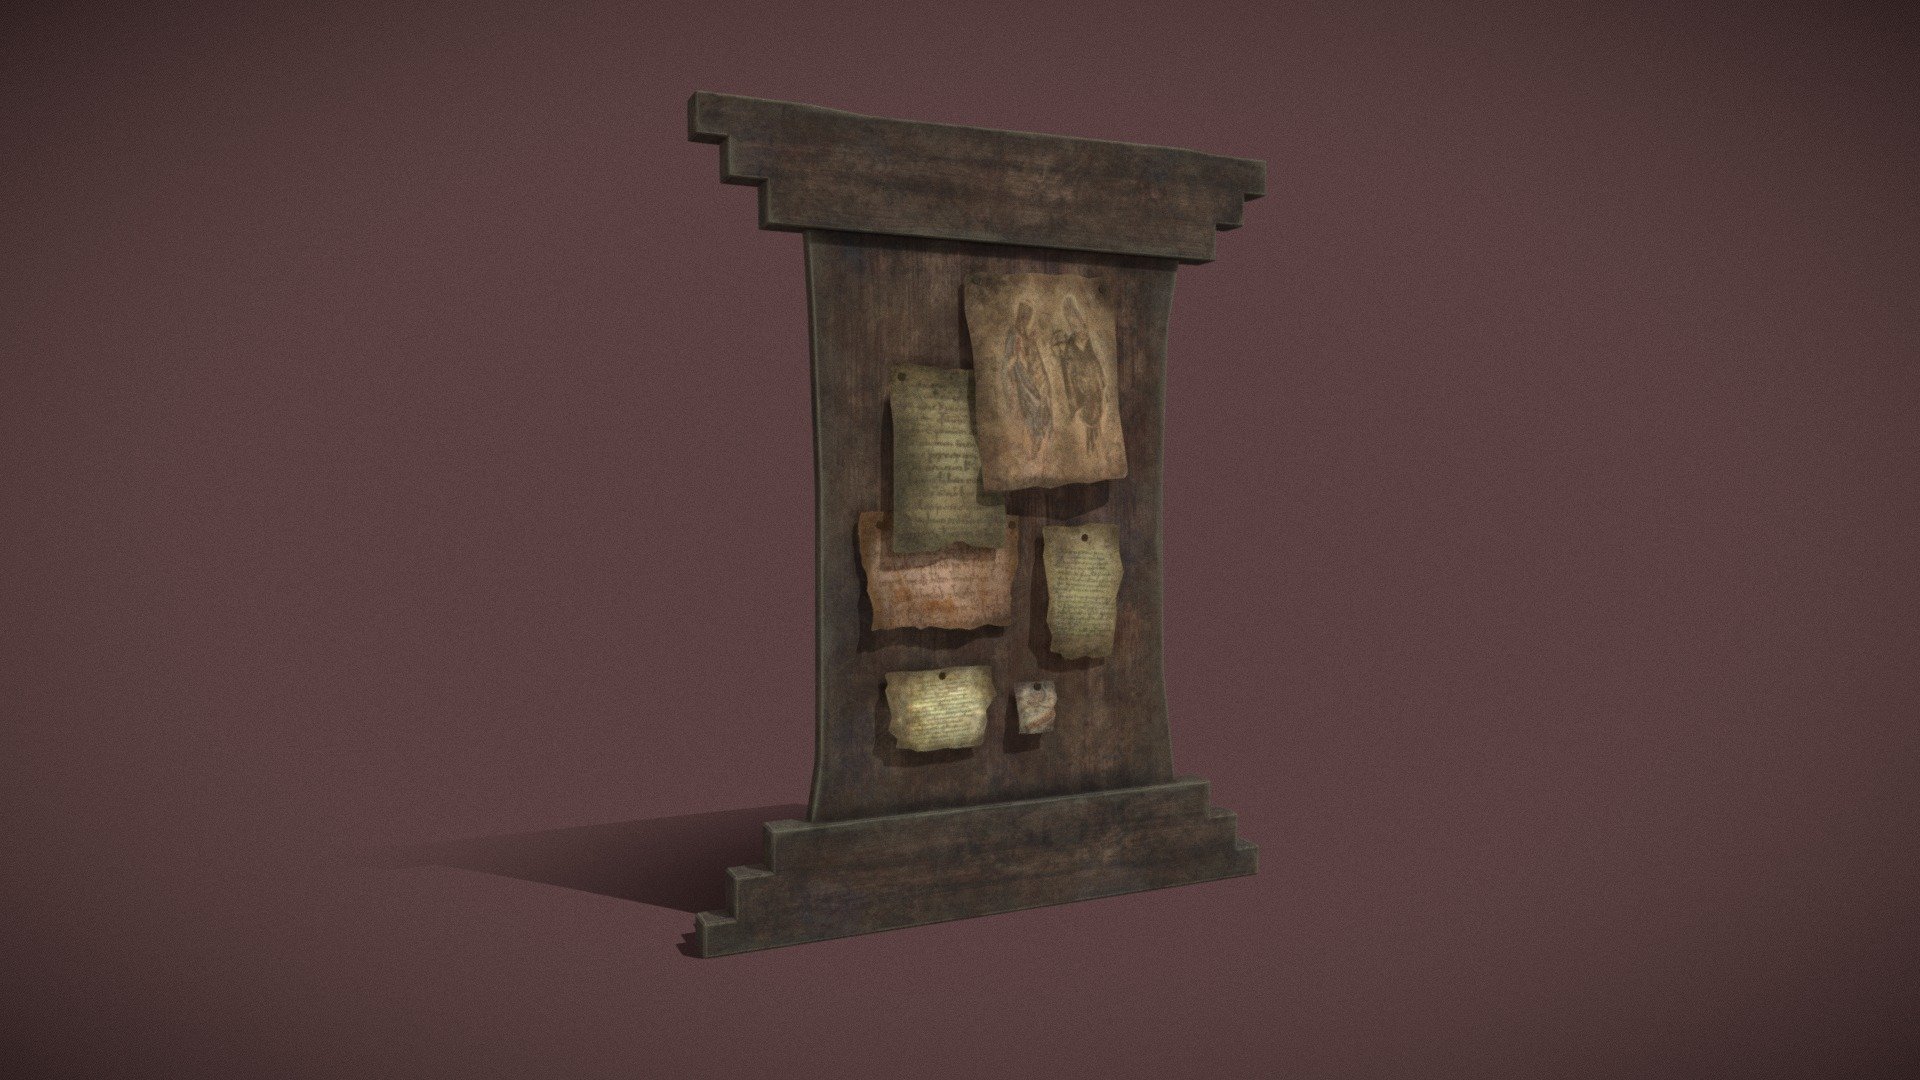 Worn Medieval Notice Board 3D Model Worn Papers and Decor on Wooden Notice Board 3d model